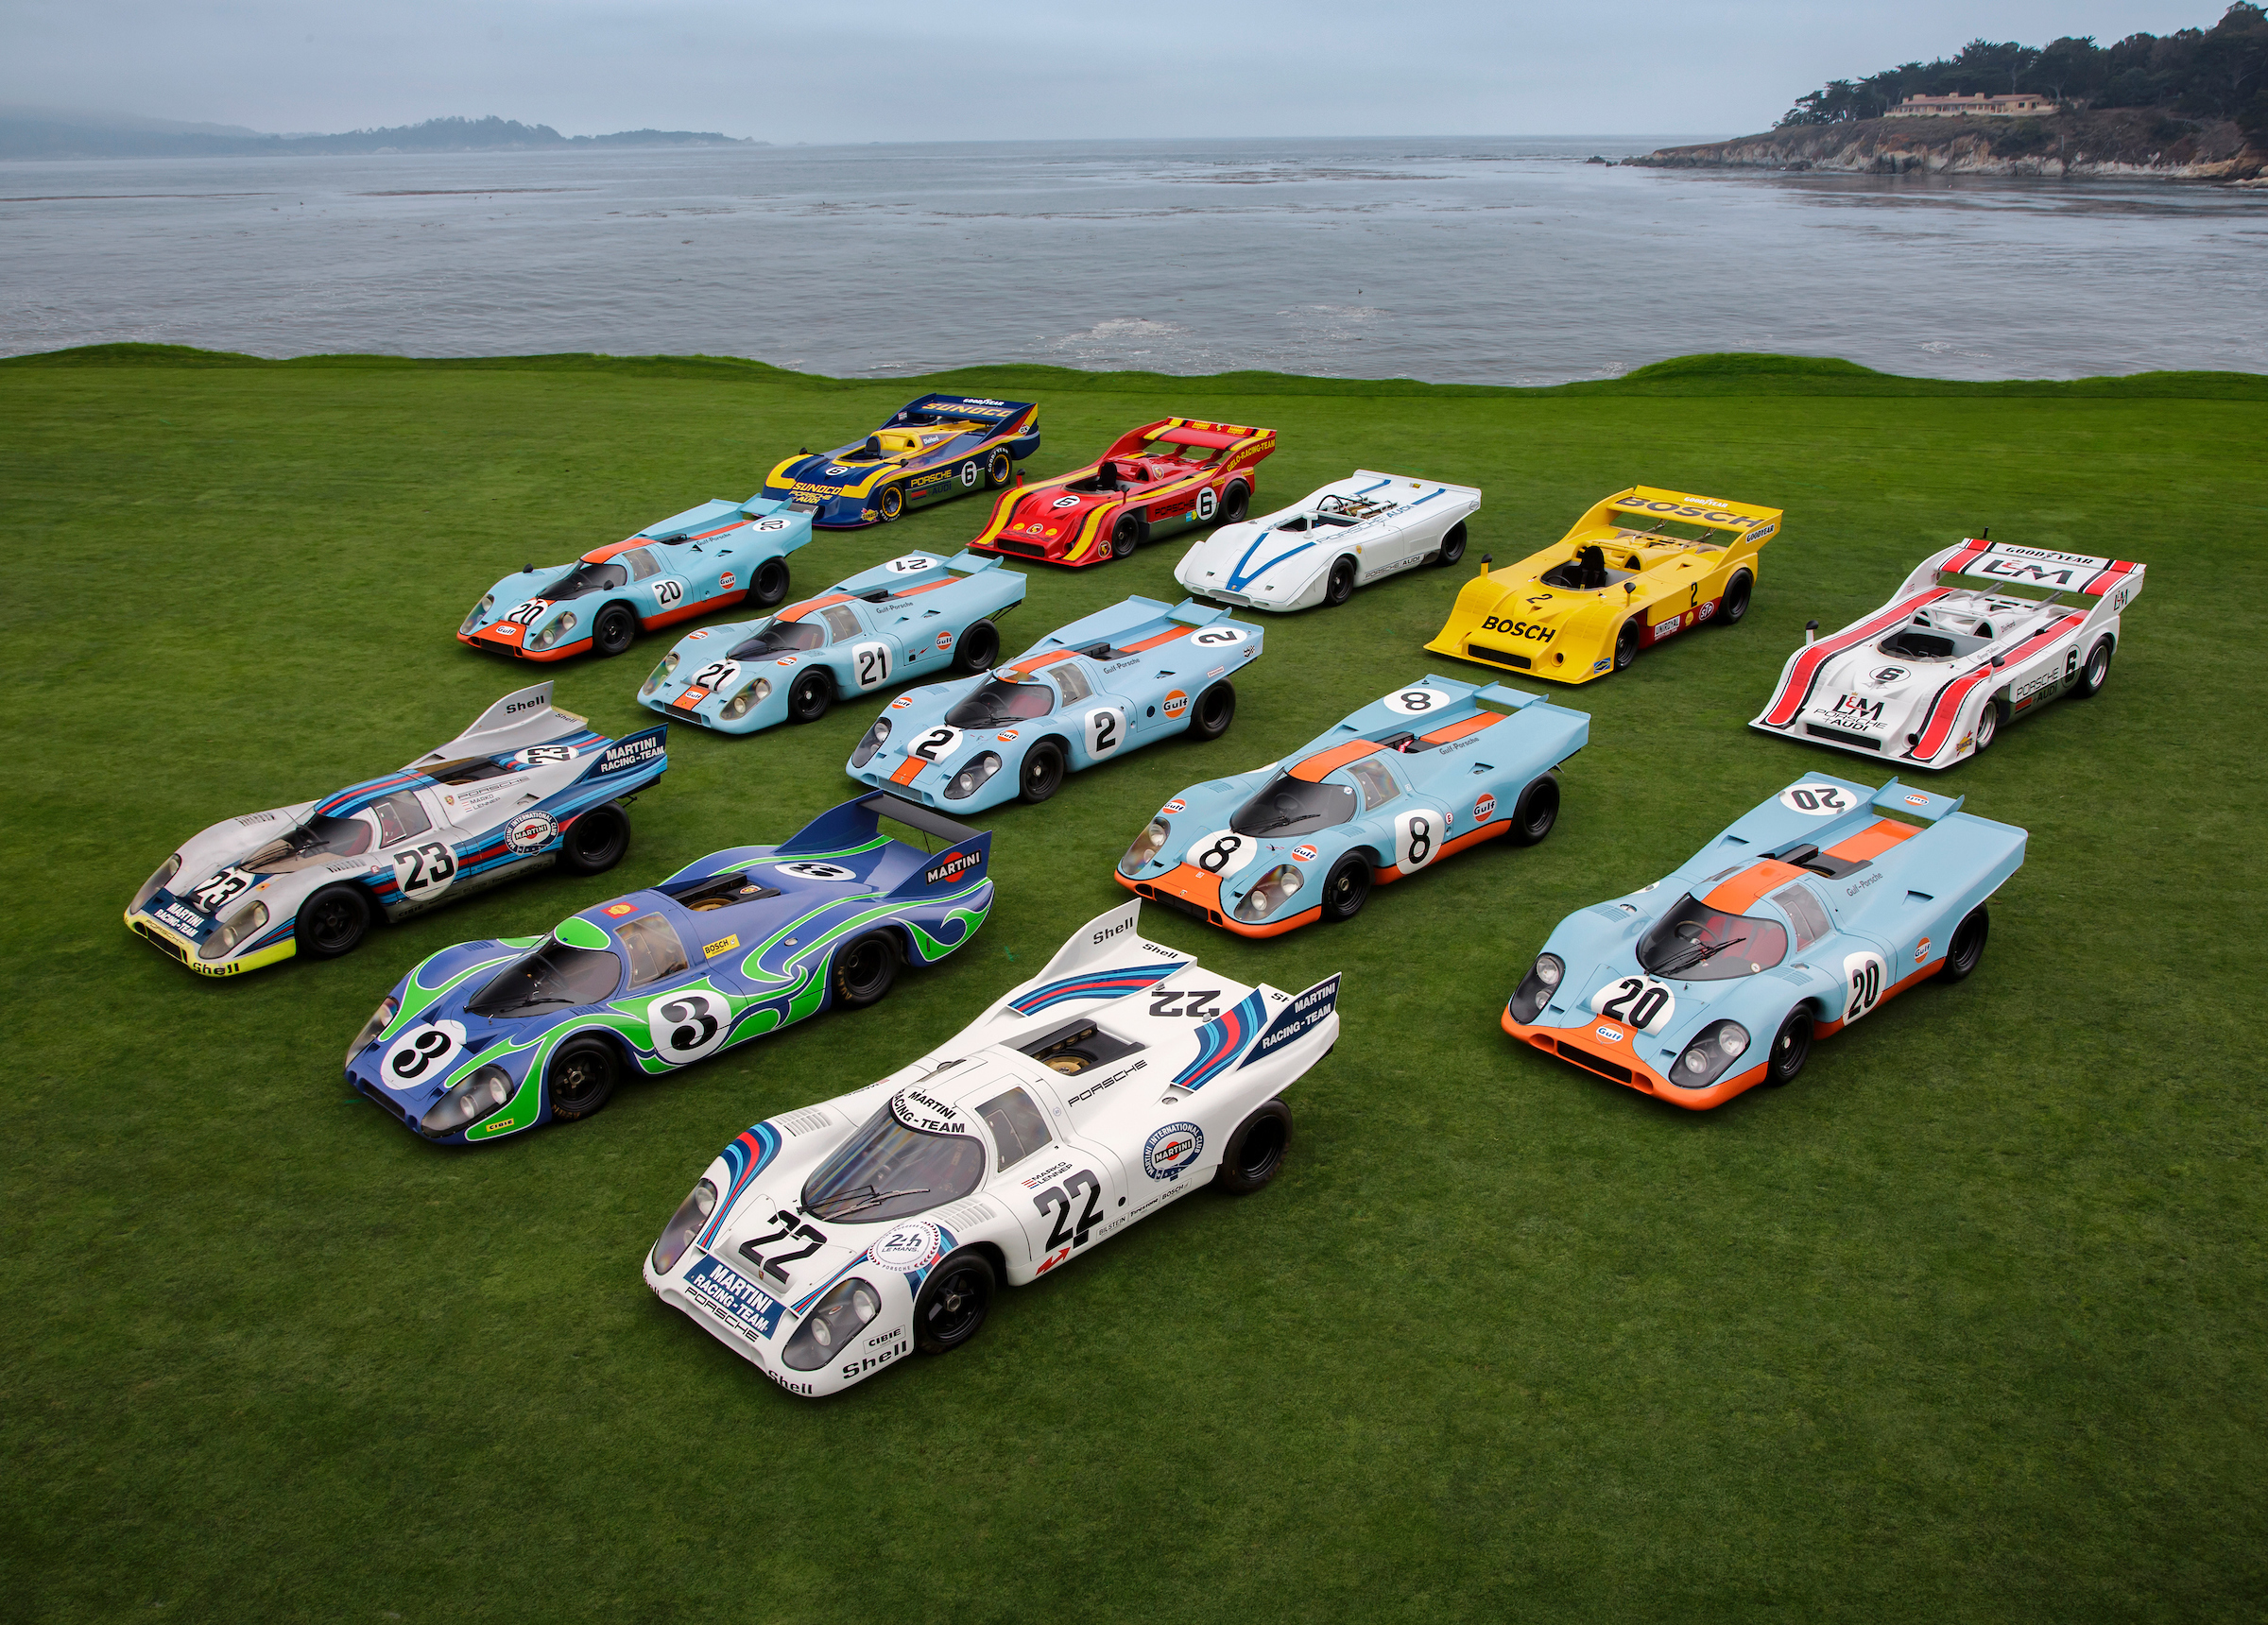 Porsche 917s (in all colours) often win awards at concours d'élégance and are snapped up at a premium. In 2017, the 917 driven by Steve McQueen and formerly owned by Swiss driver Jo Siffert sold for €12,000,000.